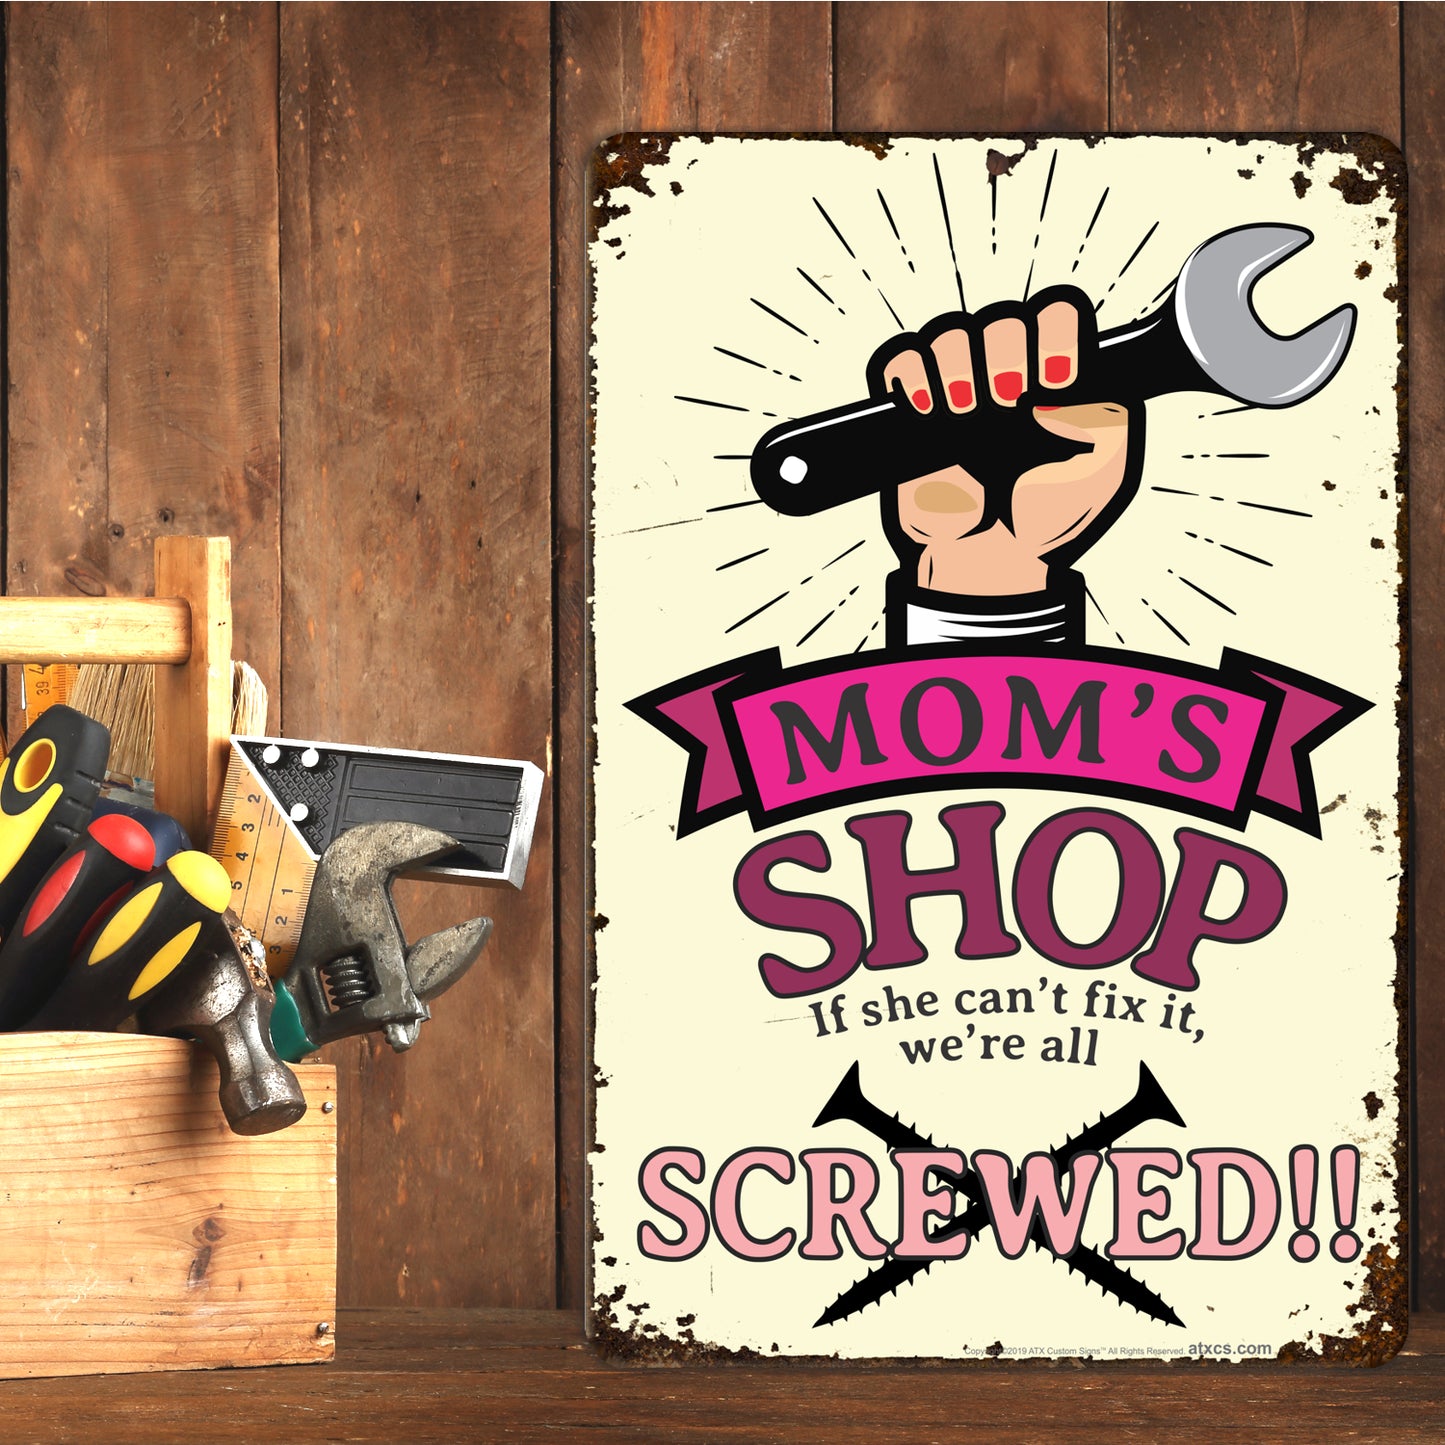 Funny Garage Signs Mom's Shop If She Can't Fix It, We're Screwed! - Size 8 x 12